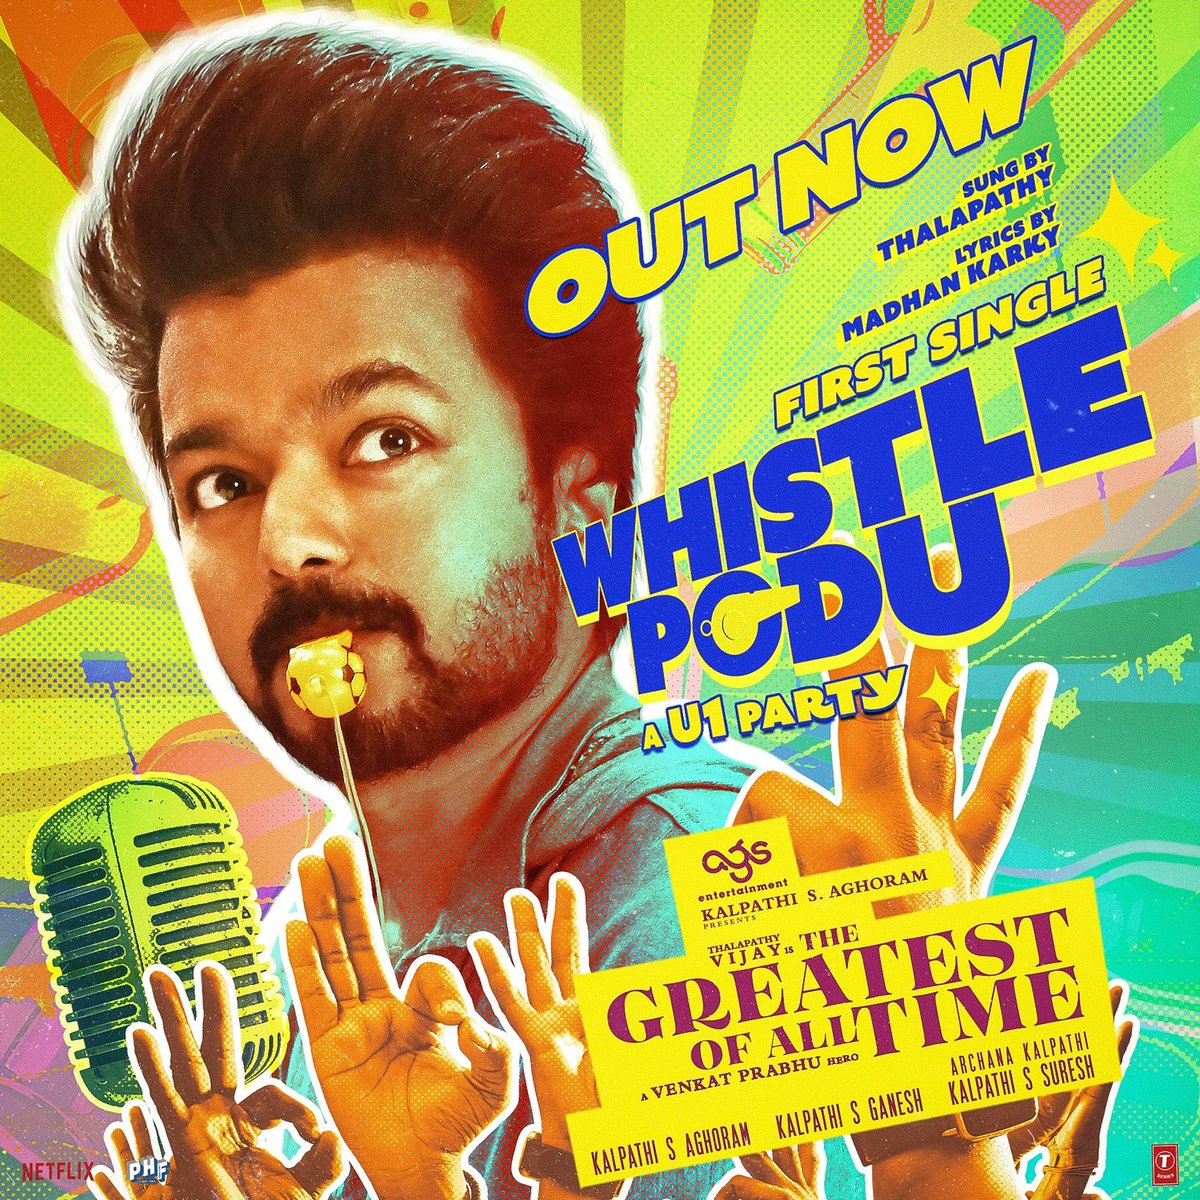 Get your dancing shoes on and let's shake it to the electrifying vibes of #WhistlePodu ! 🎵 Song Out Now youtube.com/watch?v=5GSt99… A @actorvijay Sir vocal A @thisisysr party A @vp_offl Hero Lyrics by @madhankarky #KalpathiSAghoram #KalpathiSGanesh #KalpathiSSuresh #GOAT